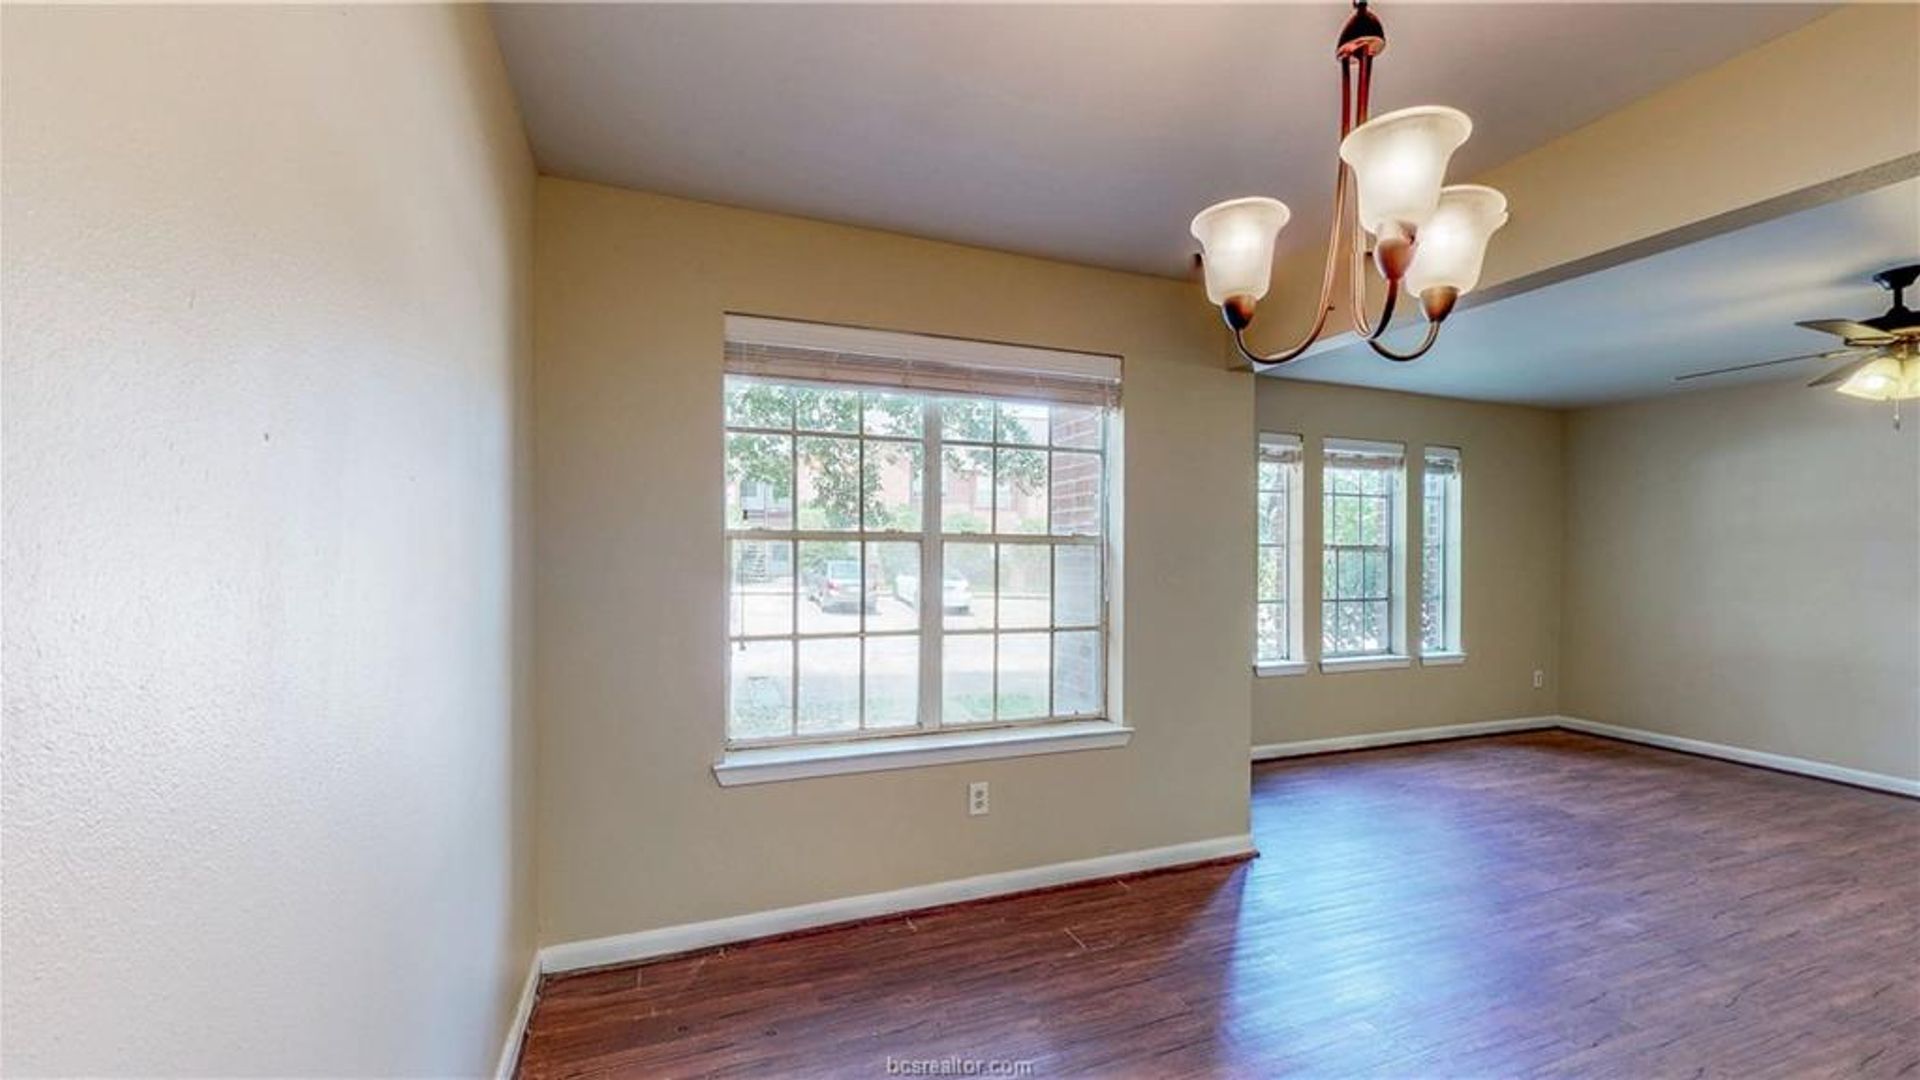 3 bedroom apartment at 701 Balcones Drive, College Station ...